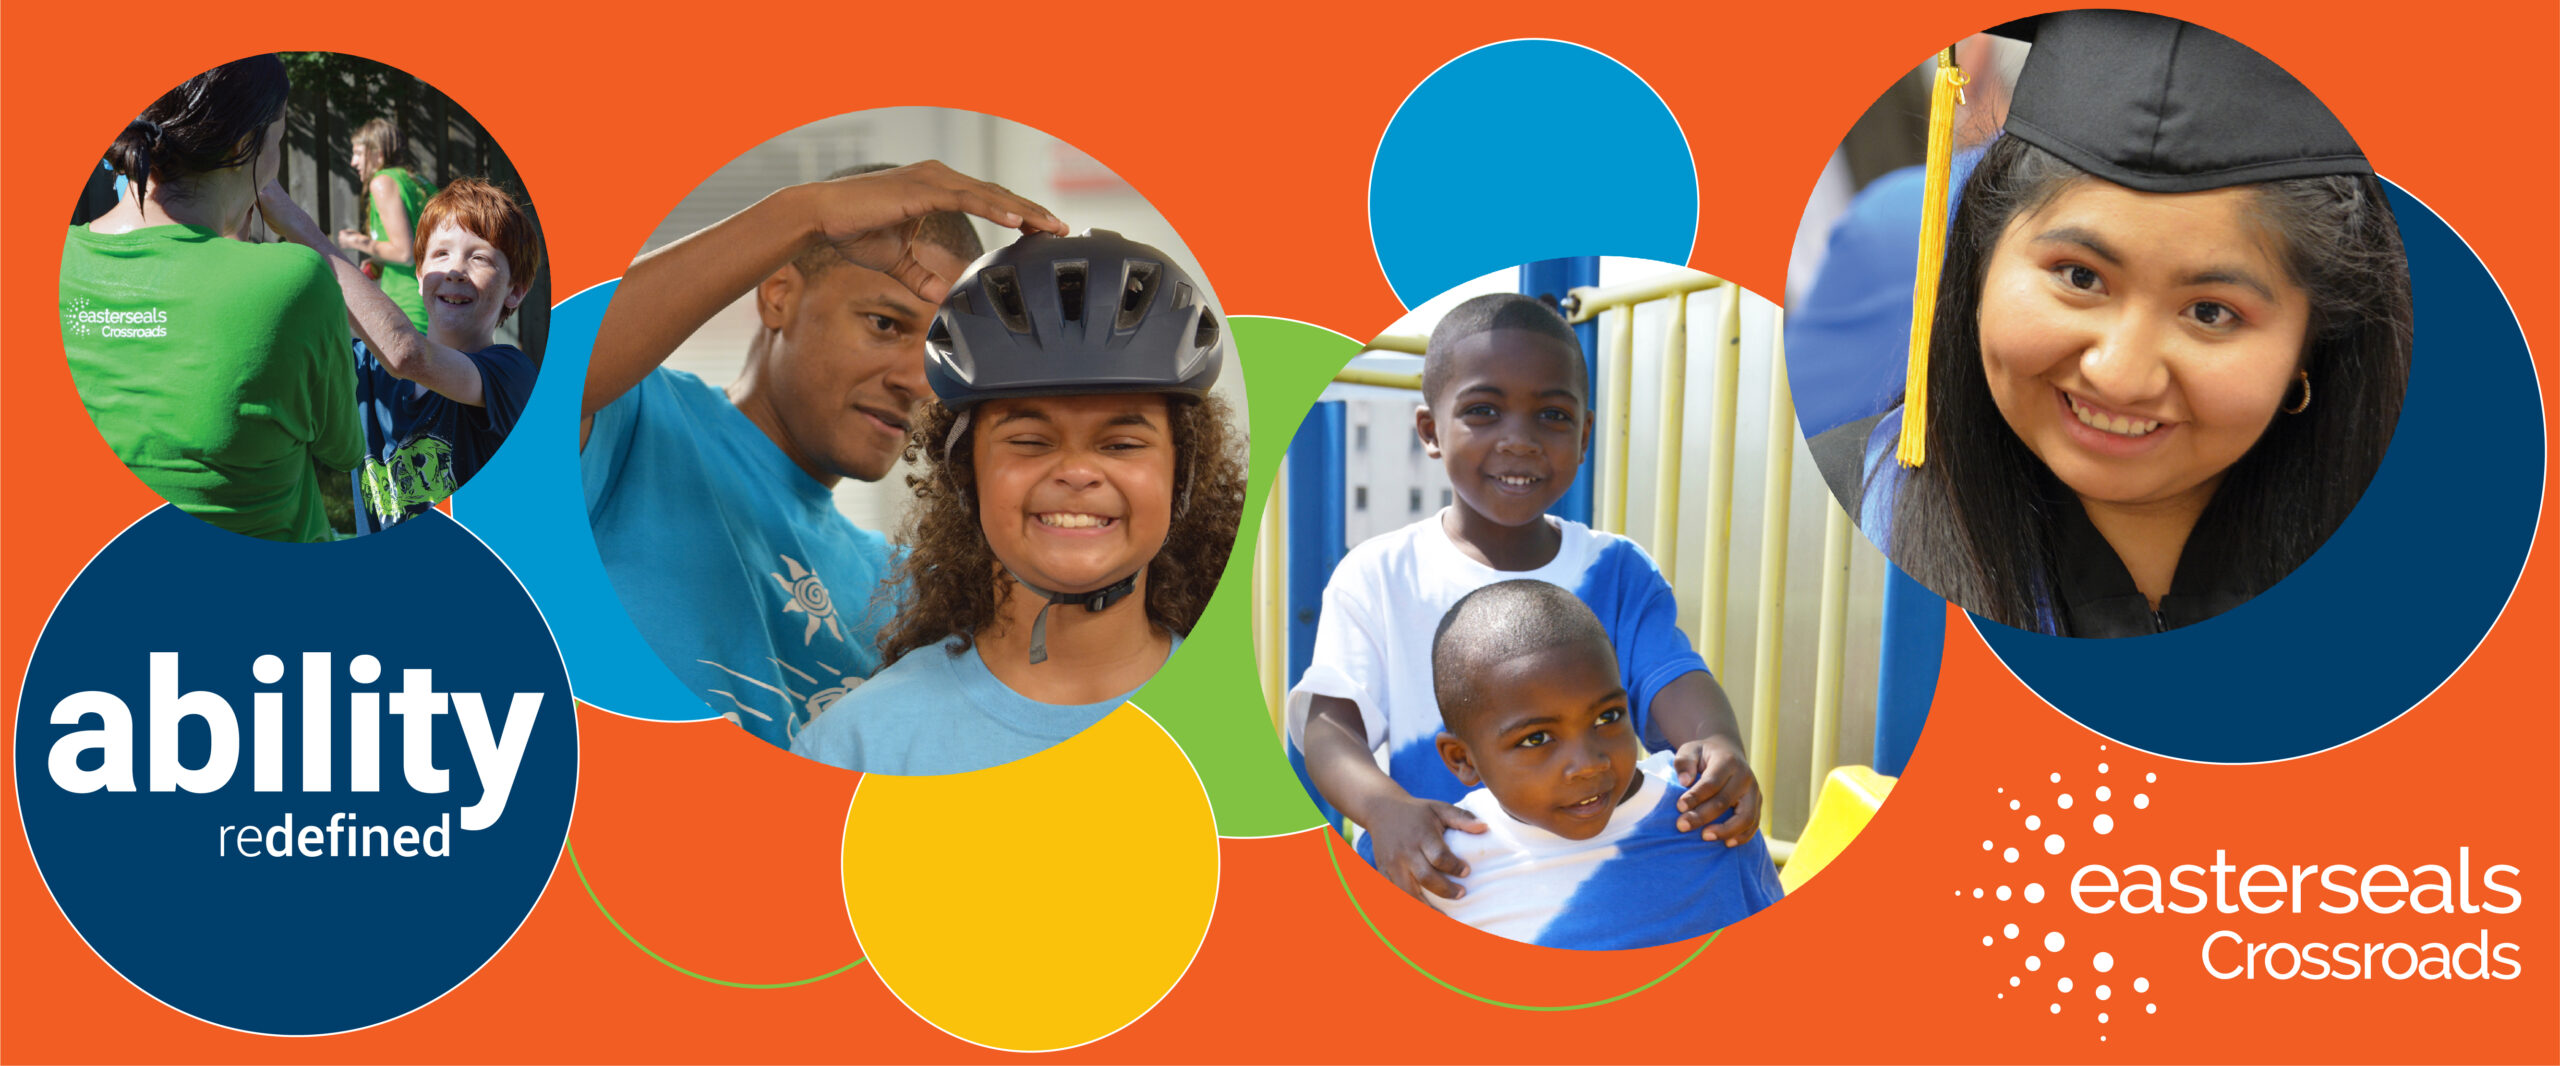 images of program participants smiling, riding a bike, graduating all with colorful circle images